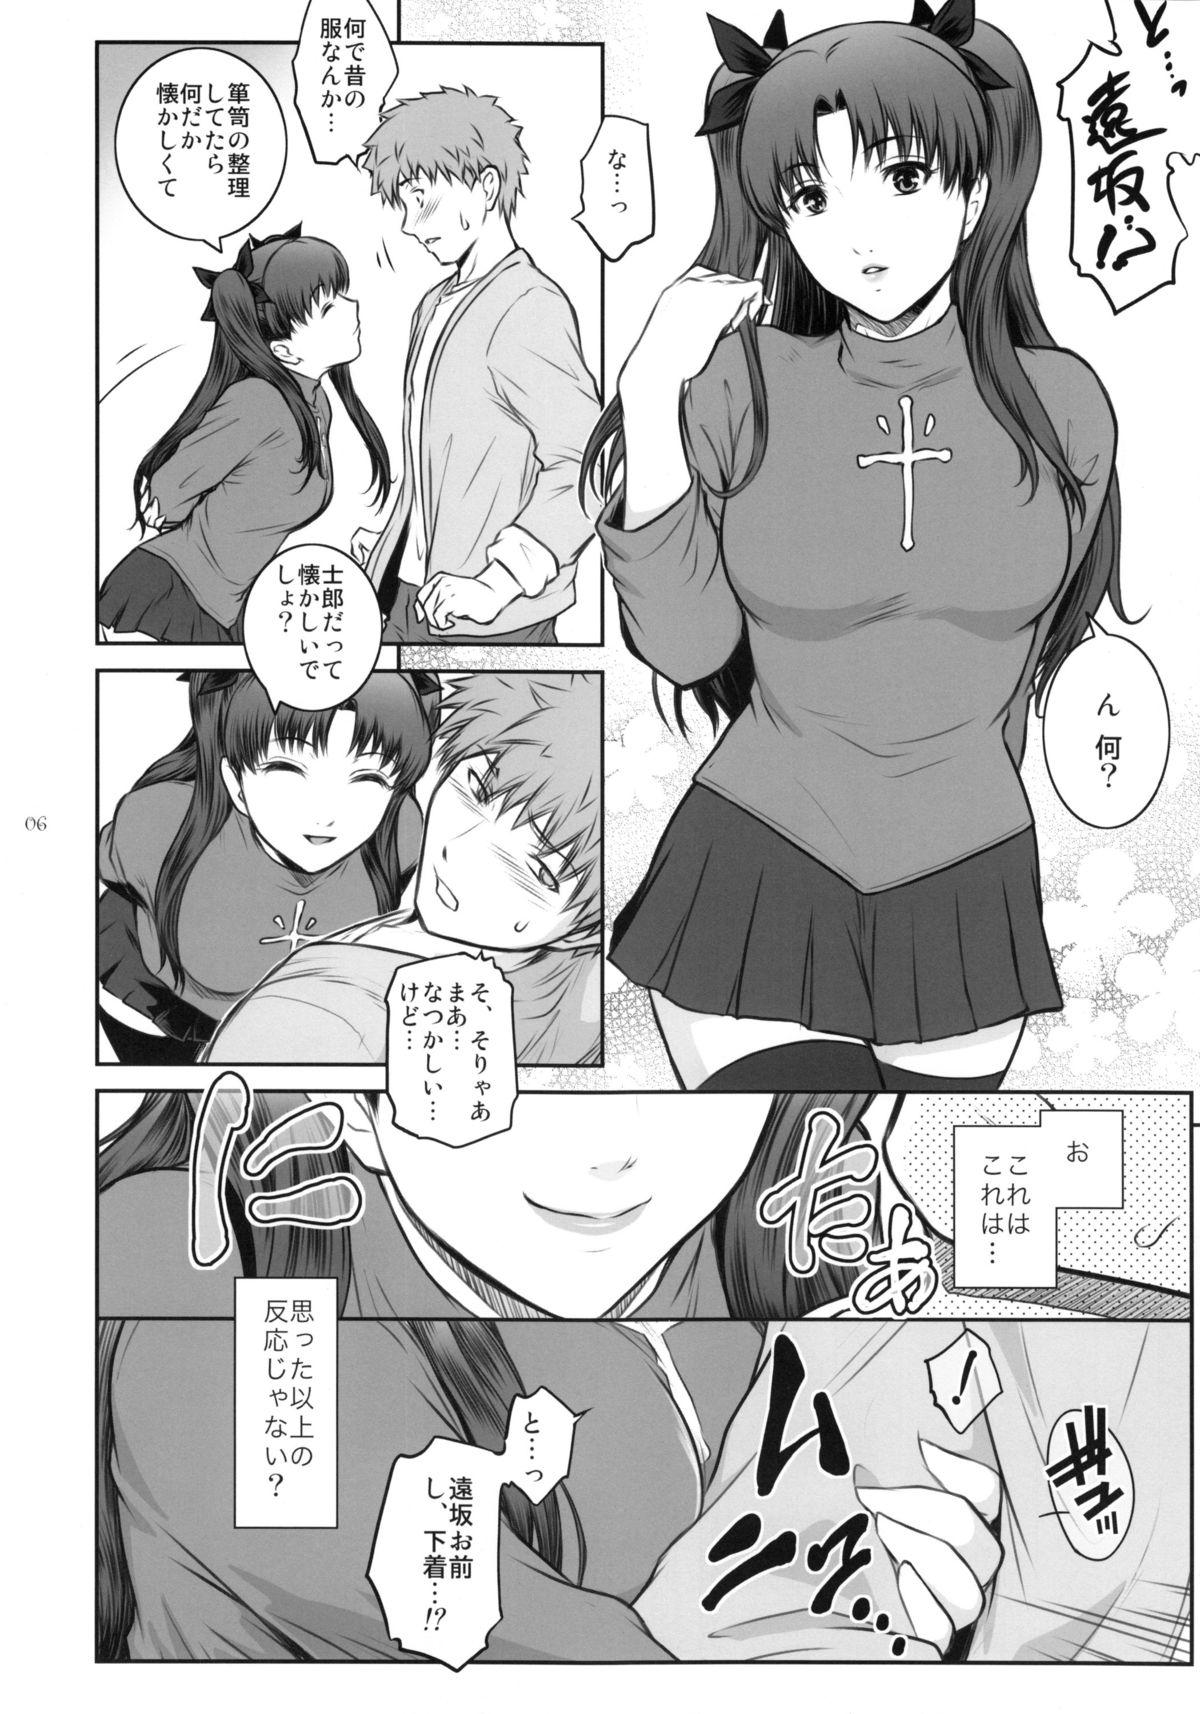 Prostitute Unusual Bedtime Working - Fate stay night Plumper - Page 6